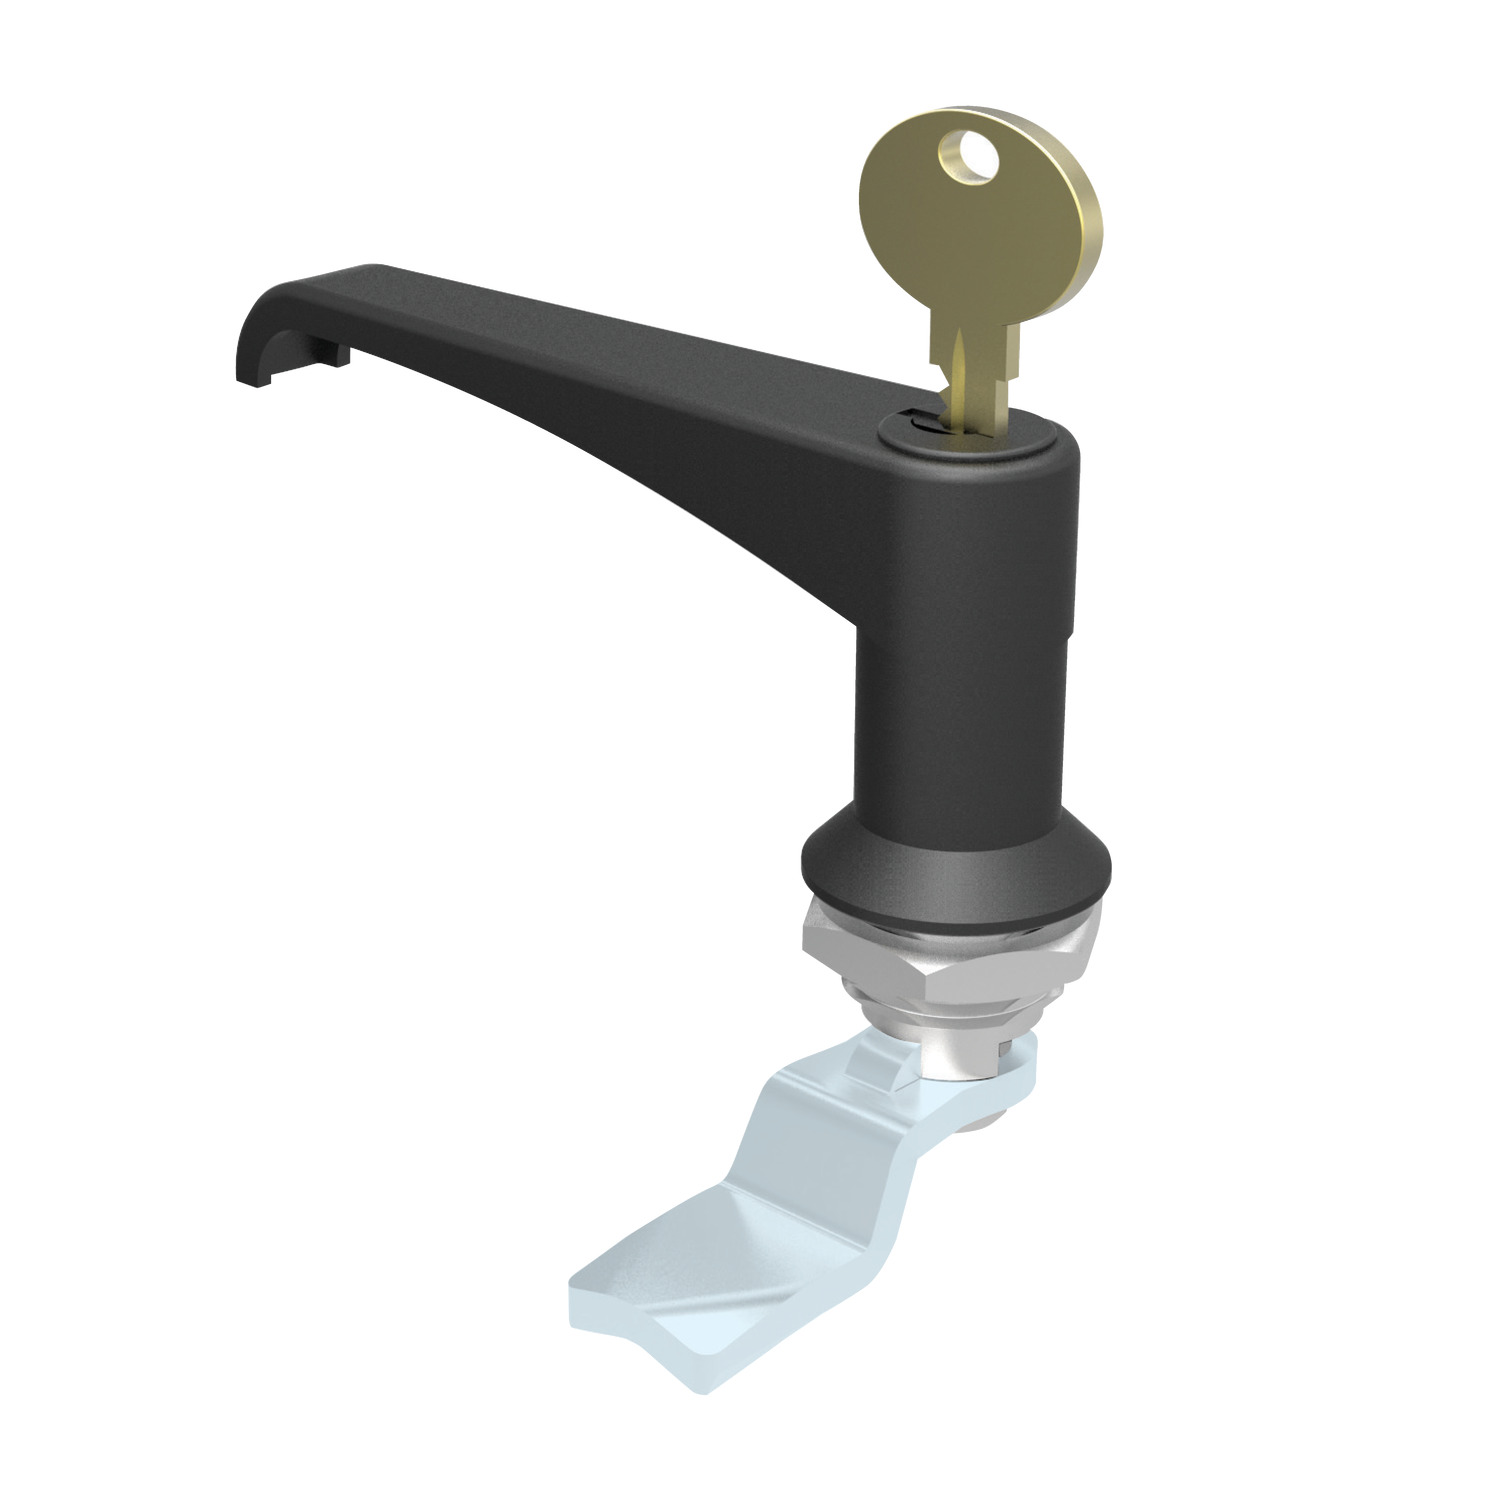 Cam Lock - Flexi System Fixed grip L-handle type cam lock. For suitable cams see: A0203, and A0240.